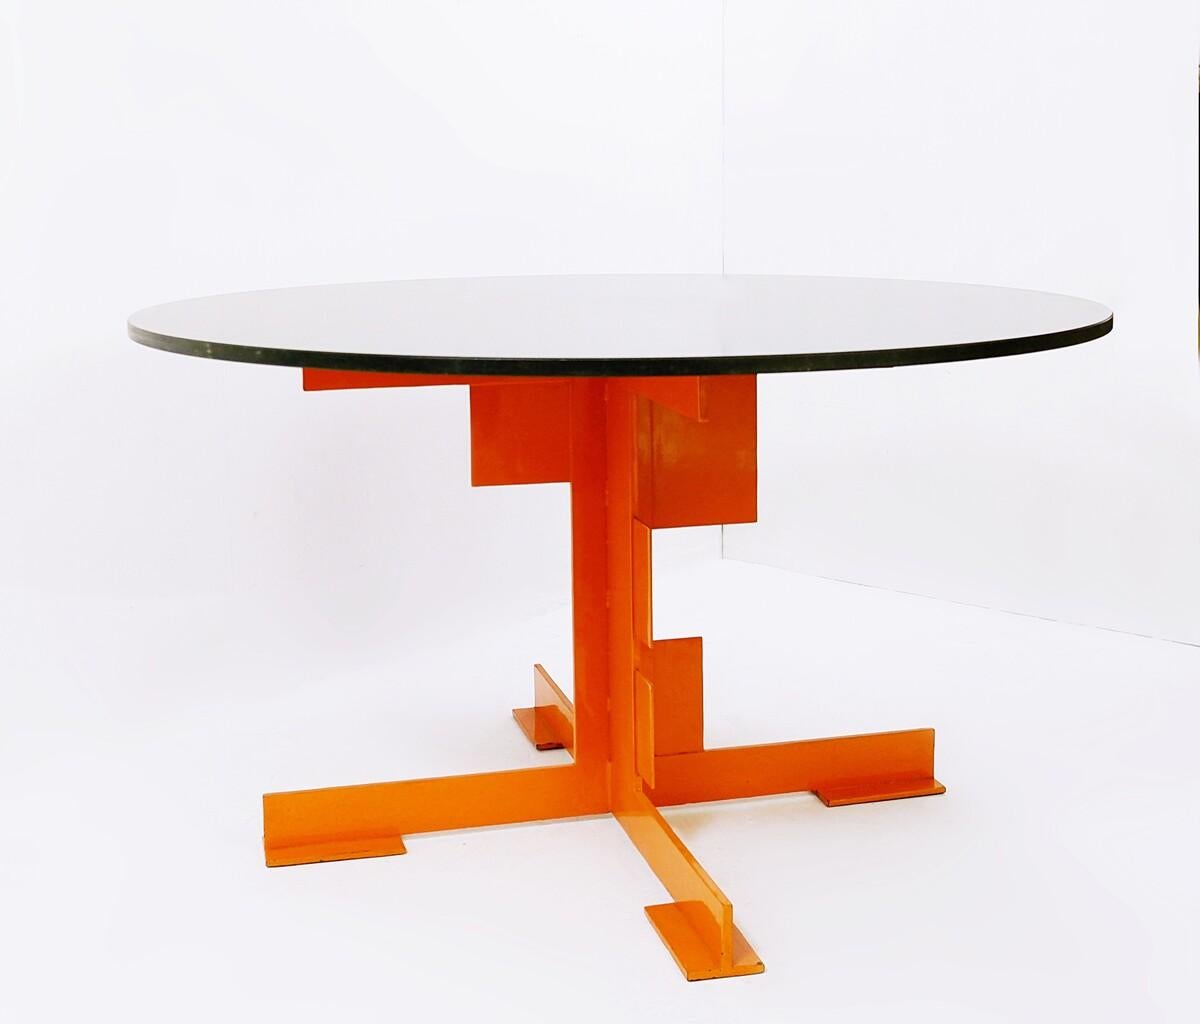 Dining table by Azucena, Metal and black granite, Italy, 1980s.